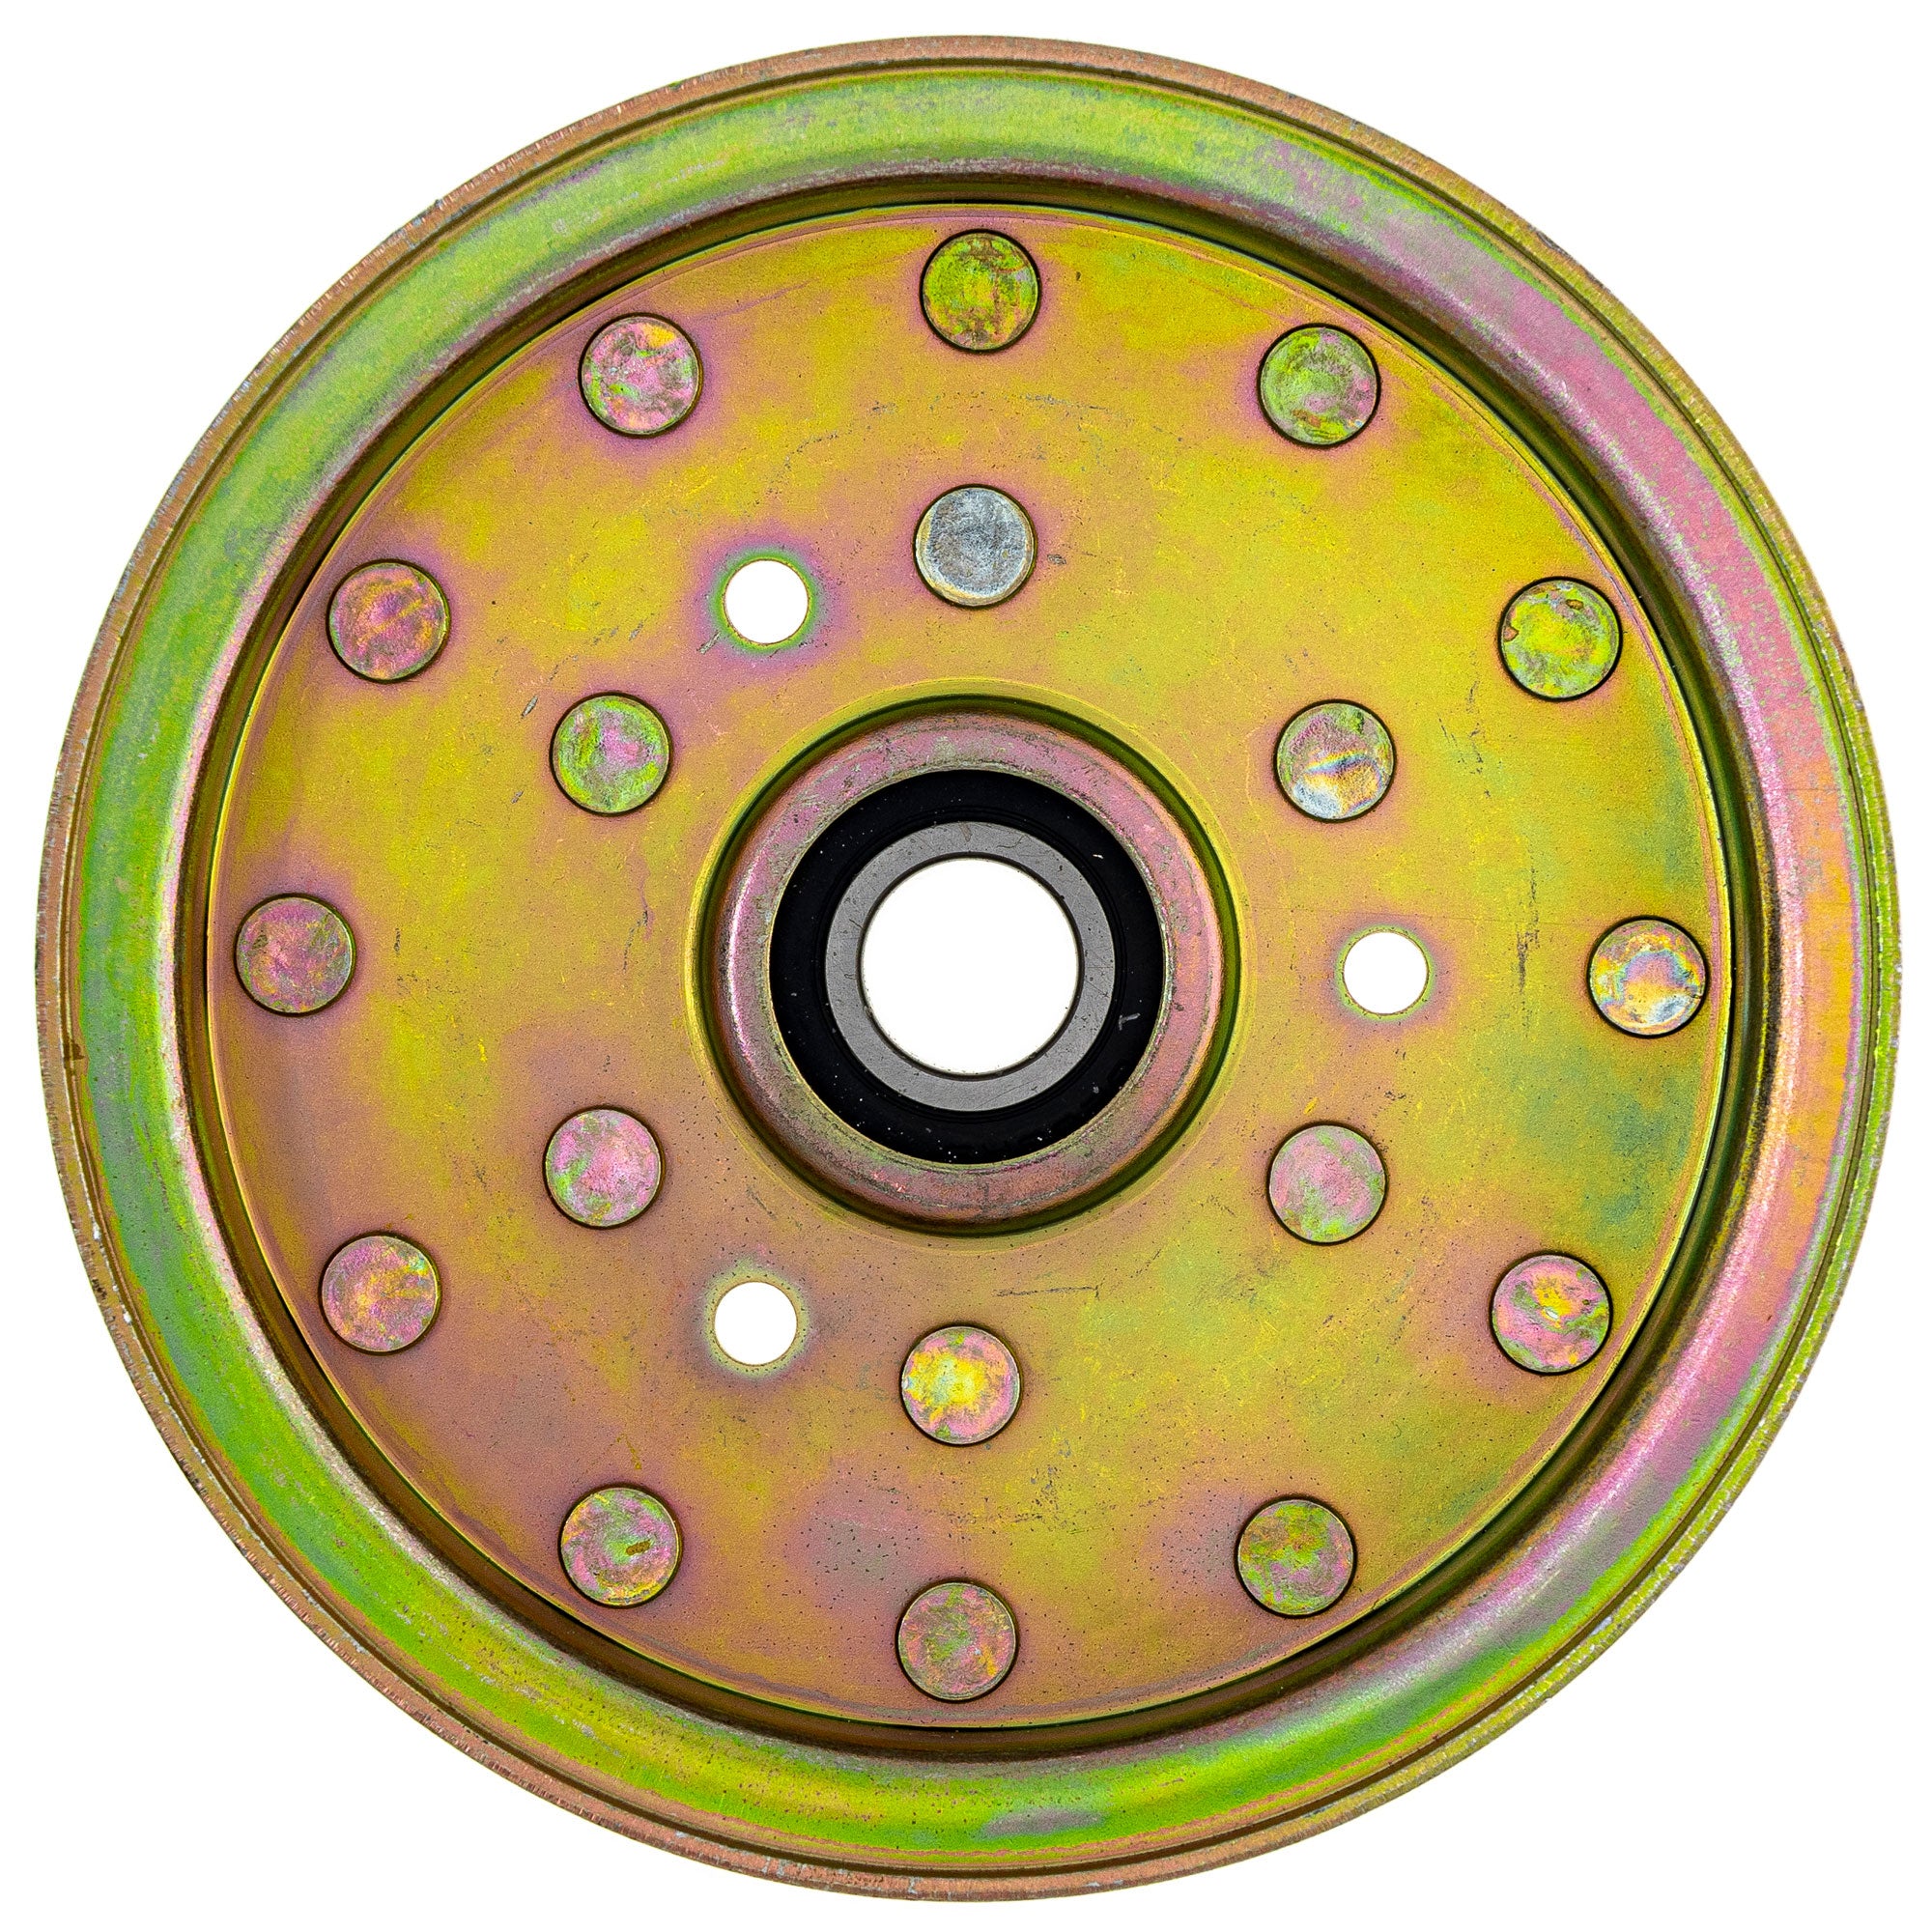 Idler Pulley For Exmark Toro Turf Tracer S X Series 116-4669 99-8912 2